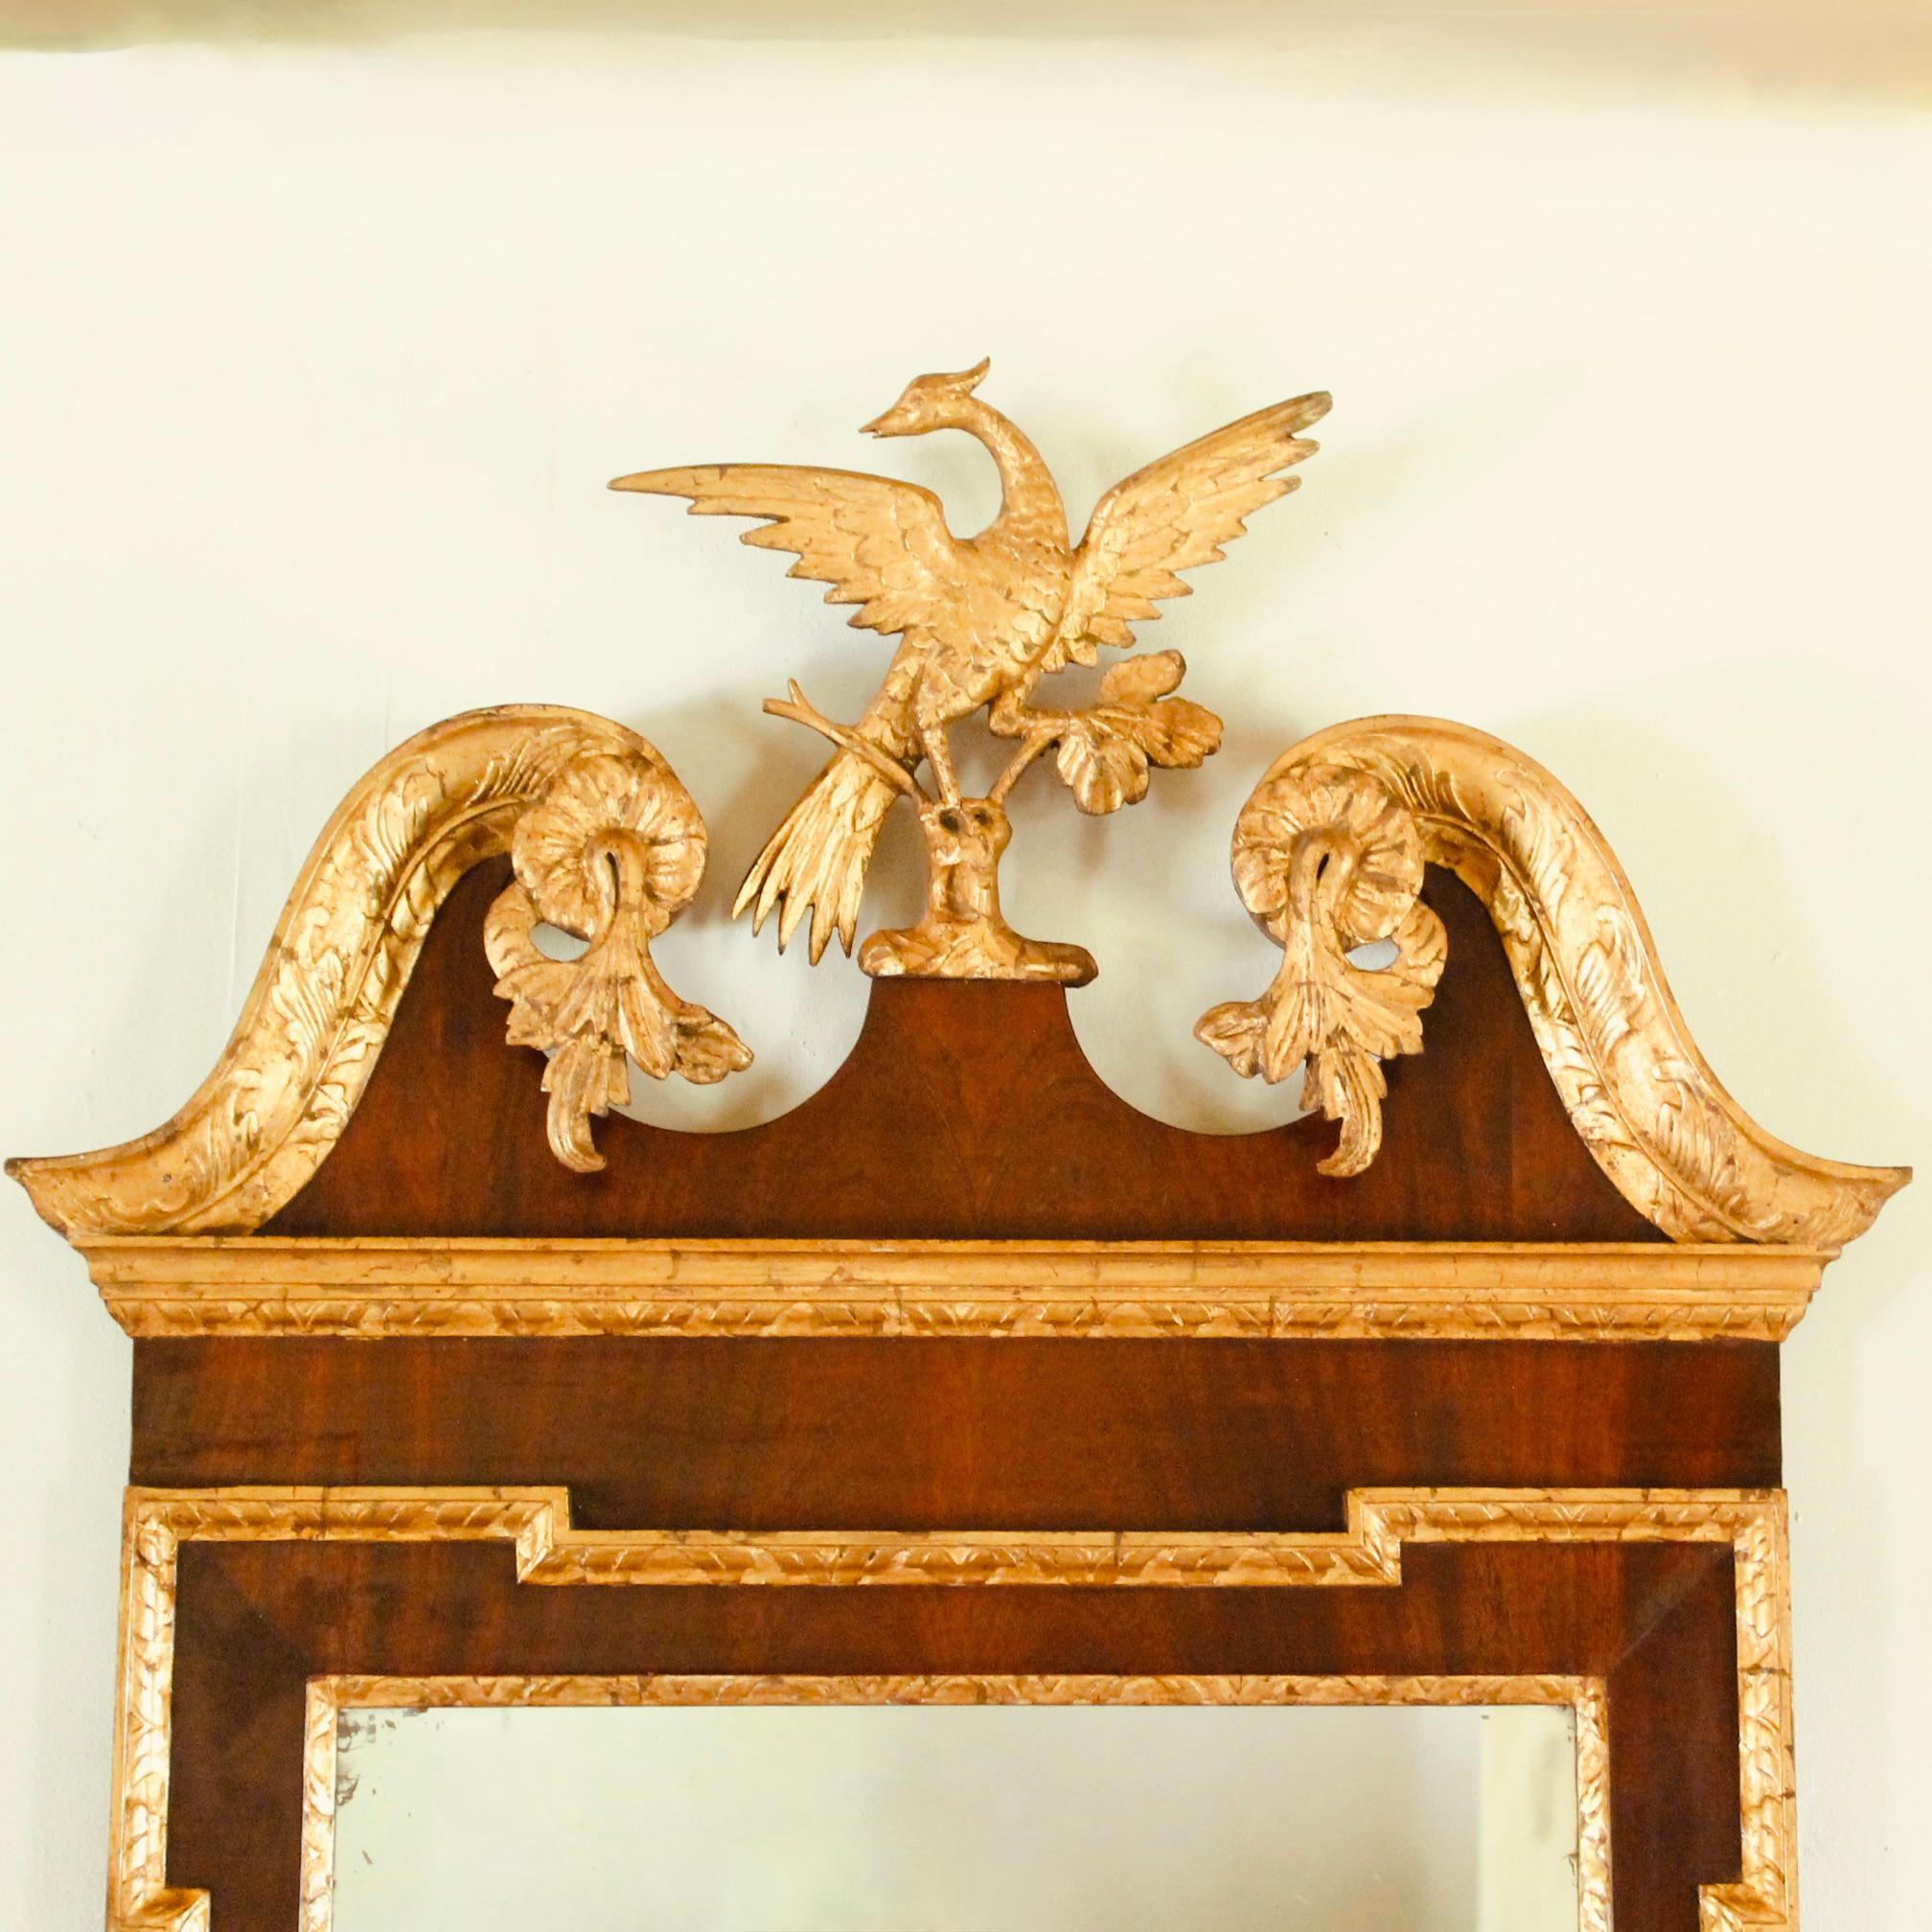 A fine ca. 1780’s American Chippendale Federal wall mirror with a scrolling “broken pediment” which flanks a central pedestal holding a Ho Ho bird with outstretched wings standing on a branch springing from a bit of rockery. The pediment is nicely